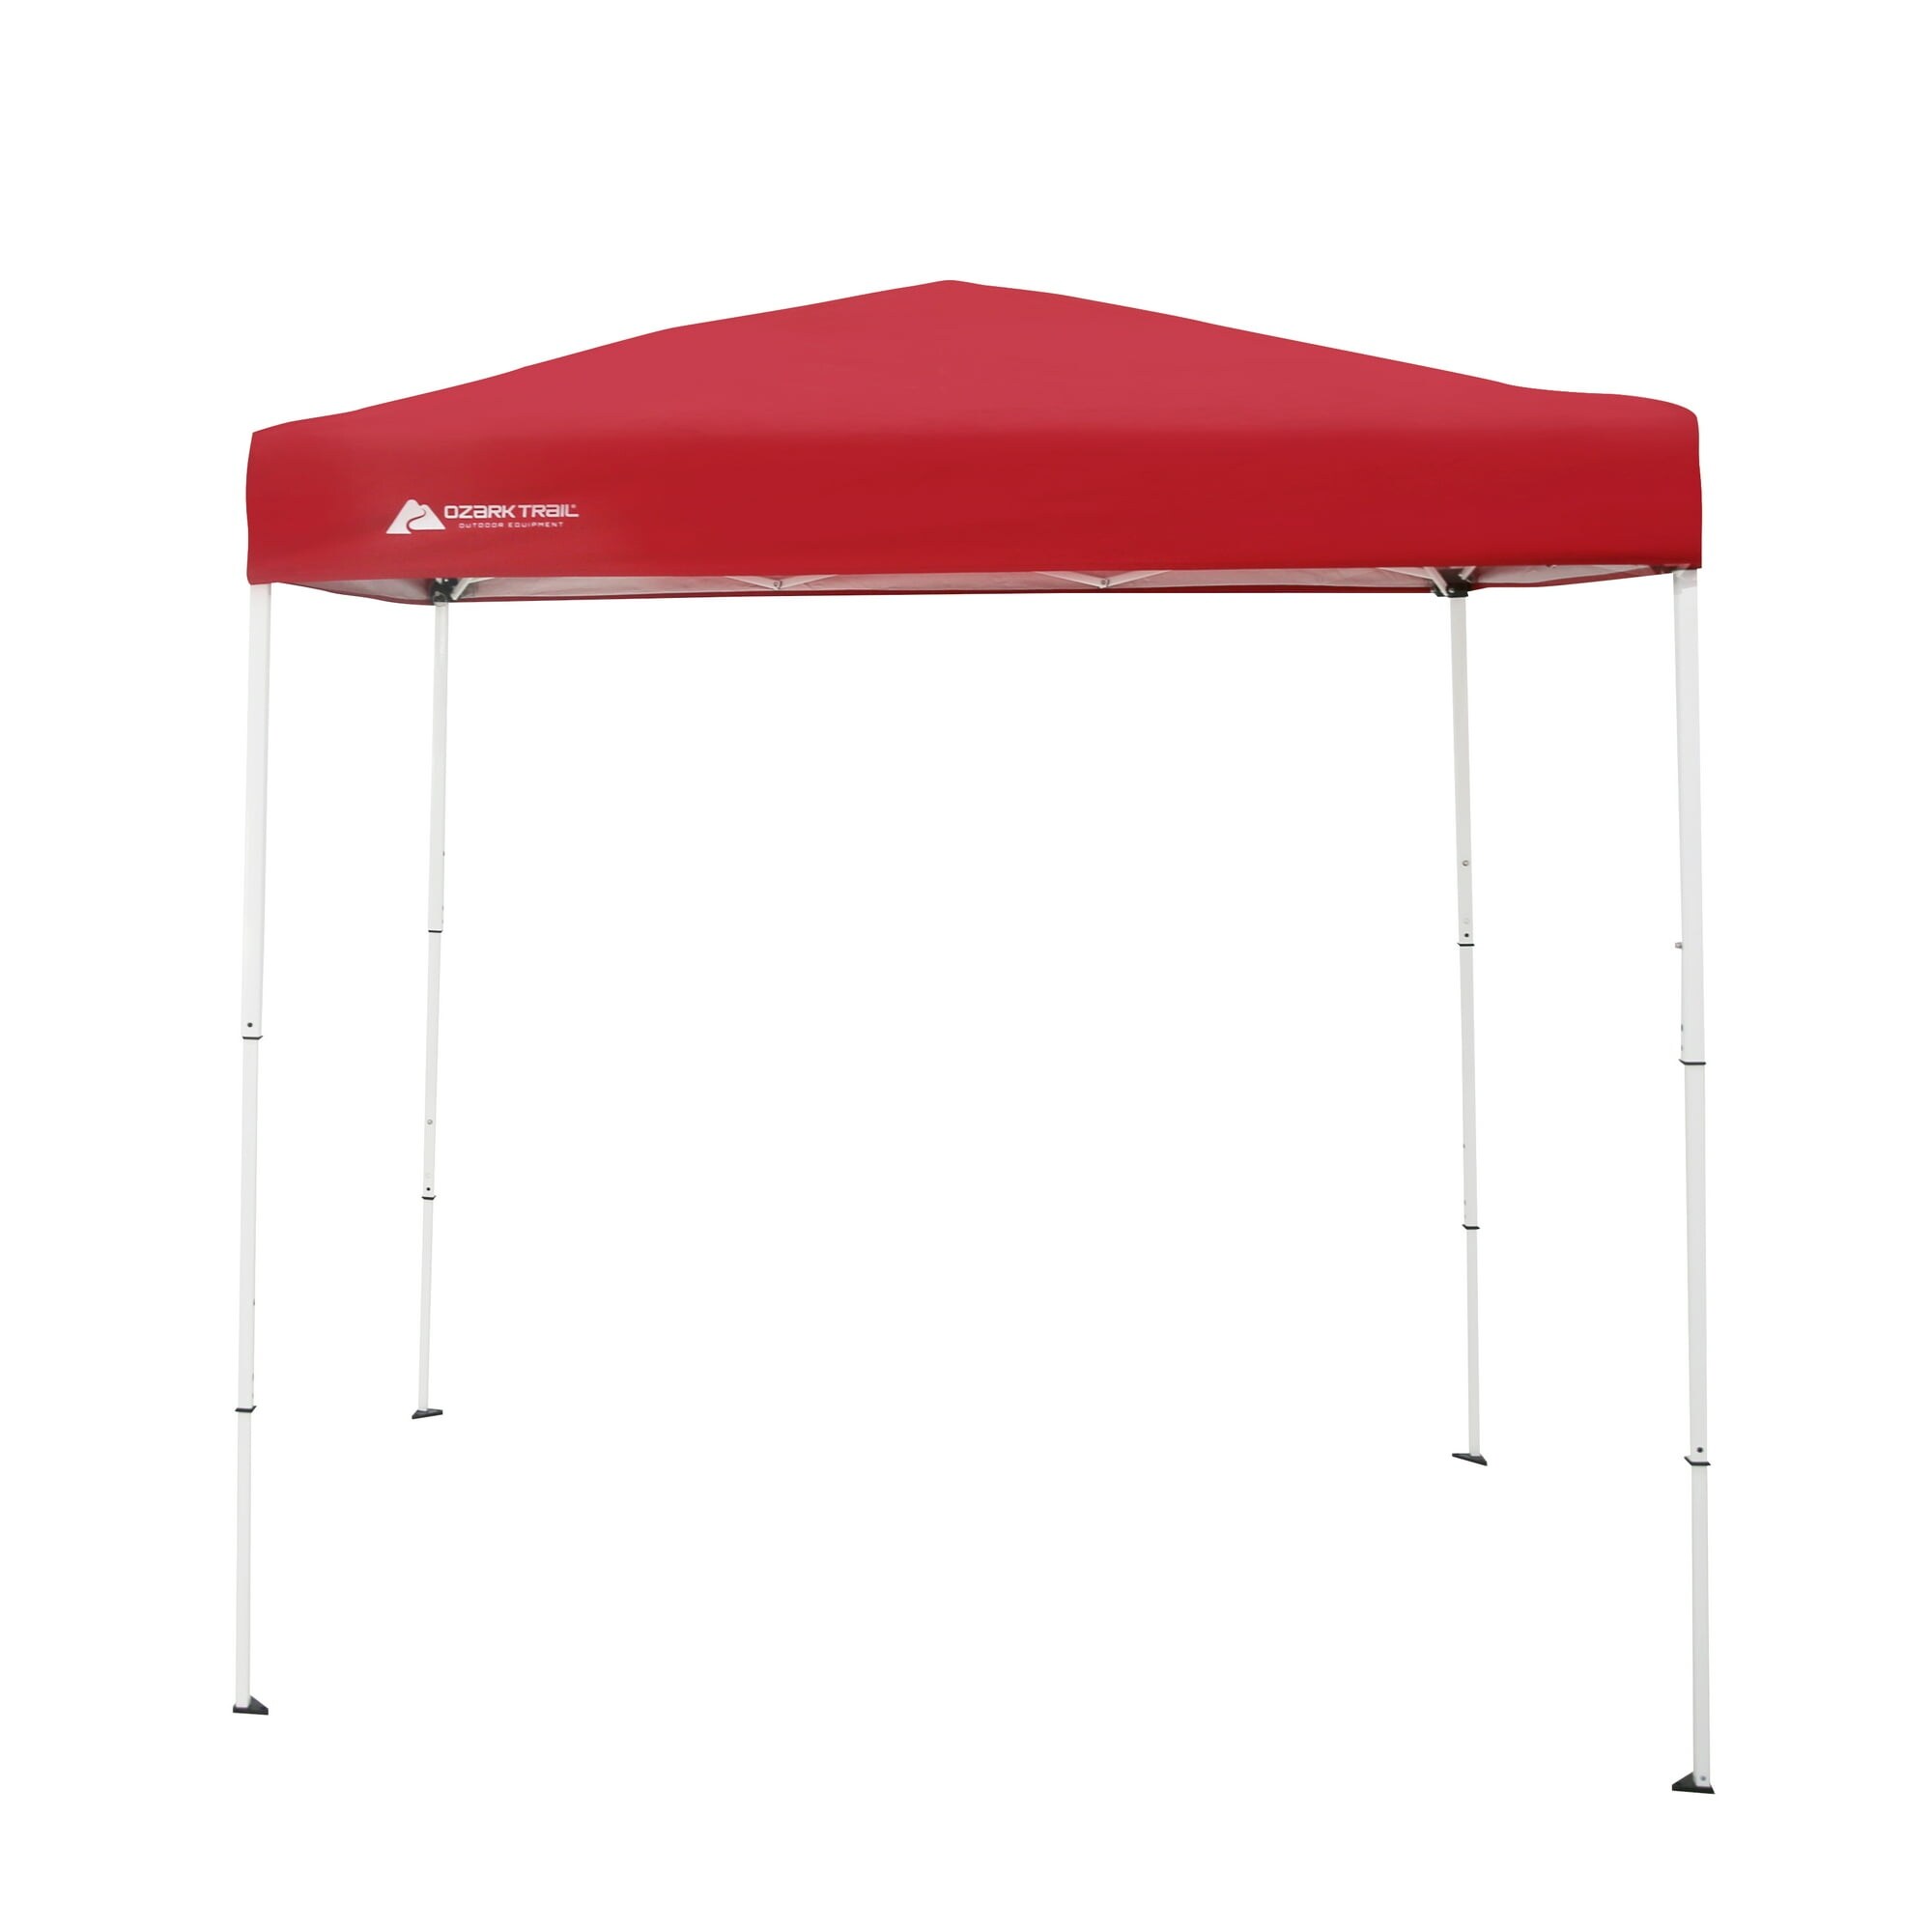 Canopy outdoor sunshade - Bed Bath & Beyond - 37533181